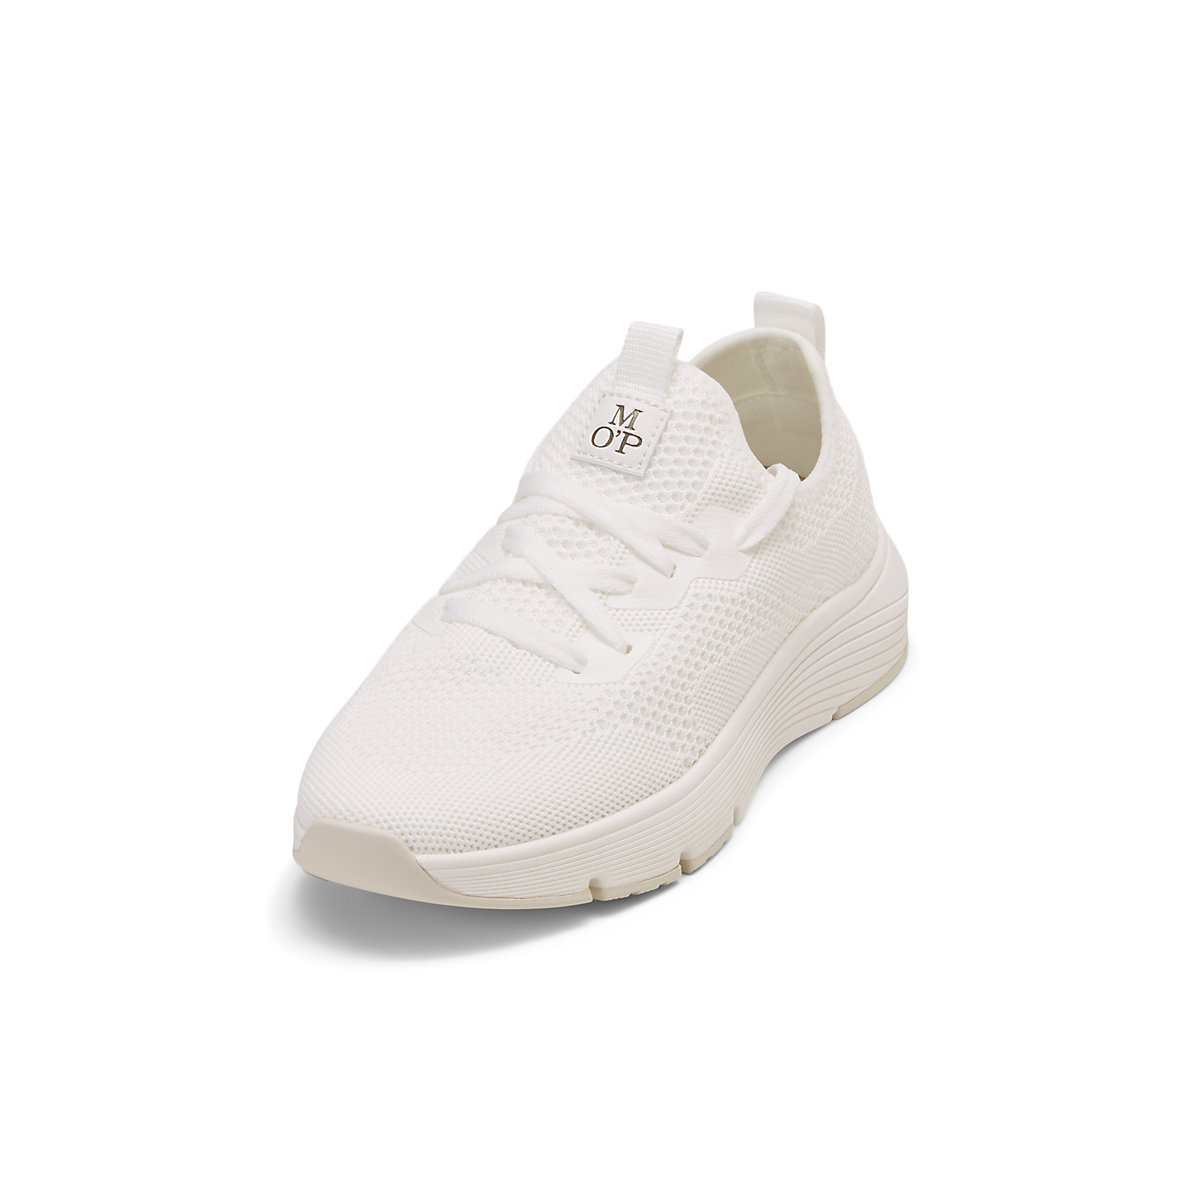 Marc O'Polo Strick-Sneaker aus recyceltem Polyester Sneakers Low weiß